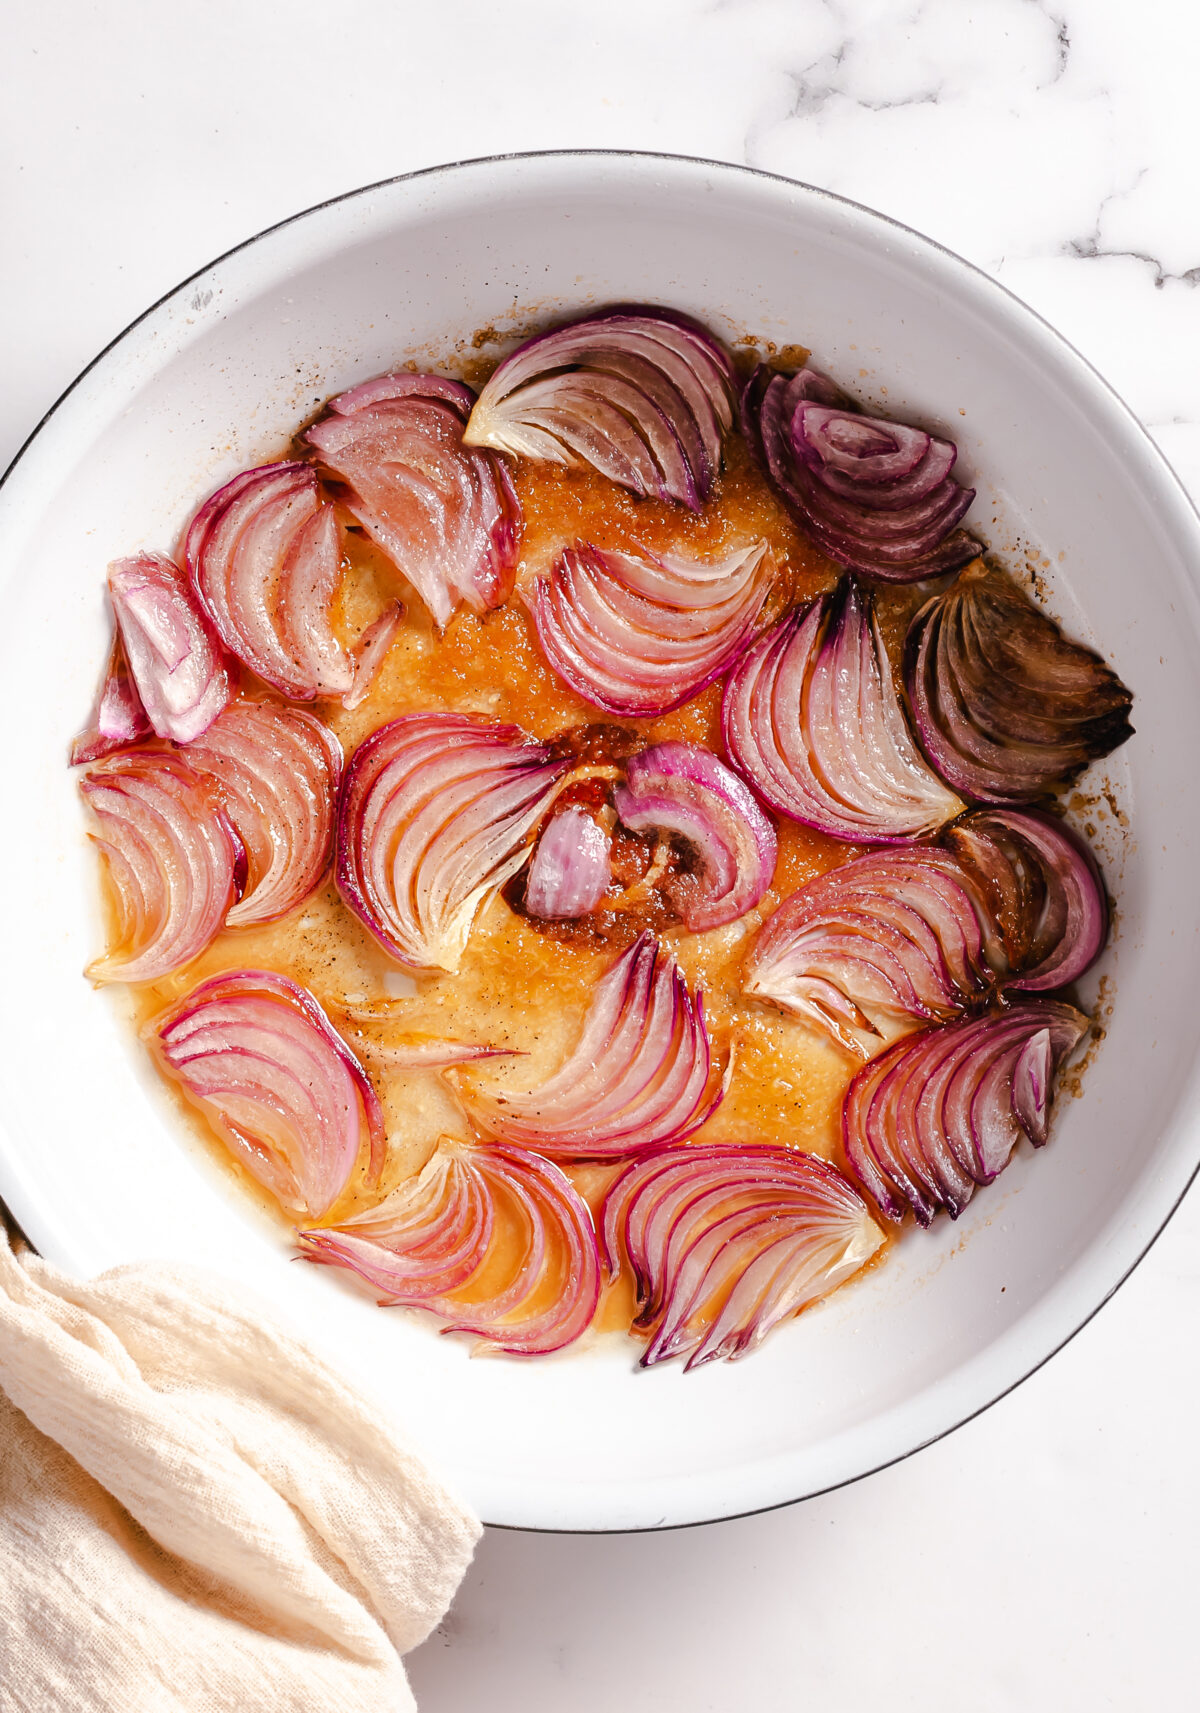 Red onion sliced and cooking in a large white skillet.